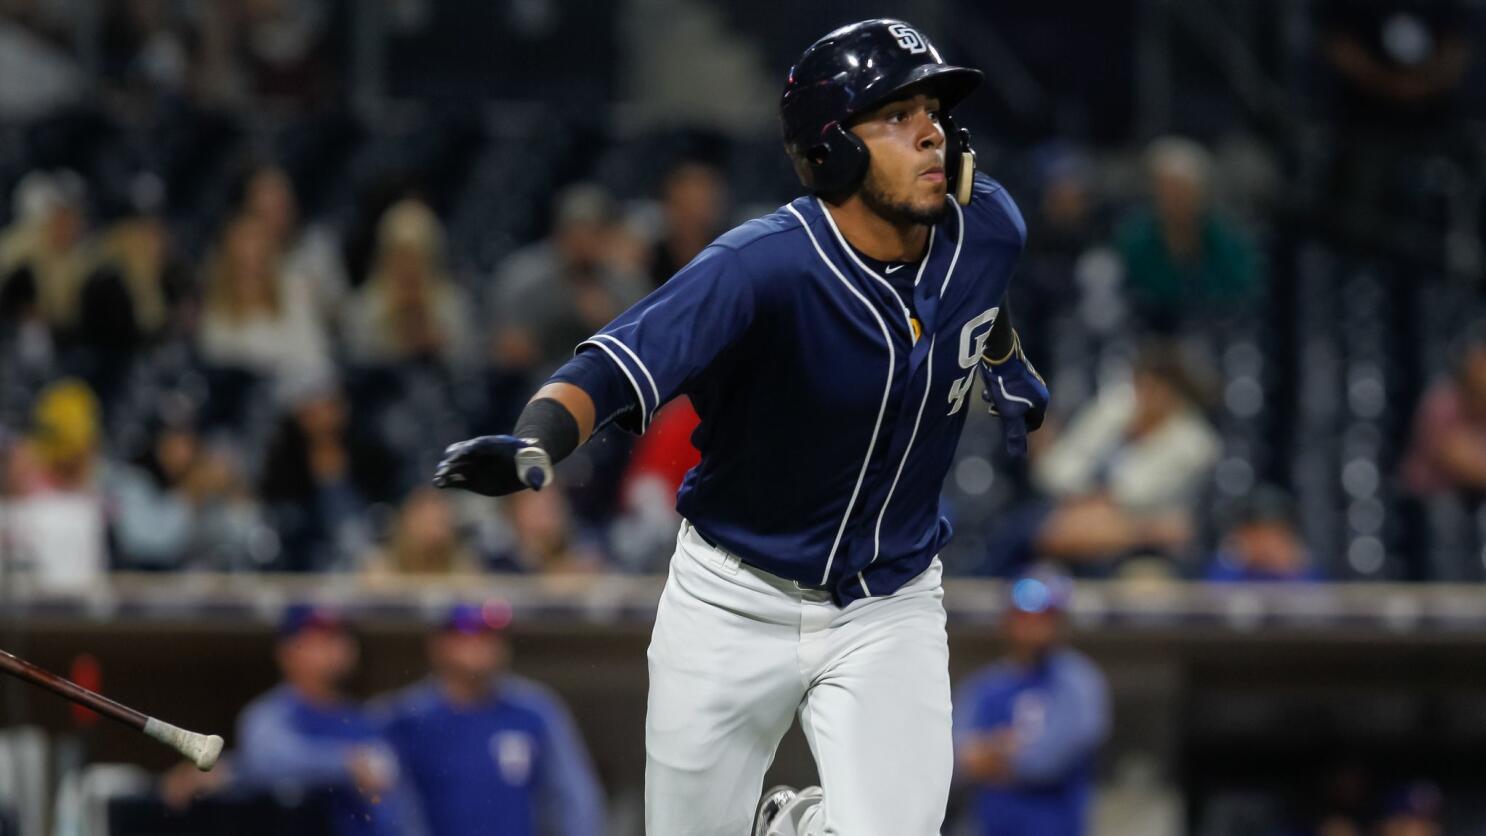 Tatis homers and rookie Avila gets his 1st win as Padres shut out